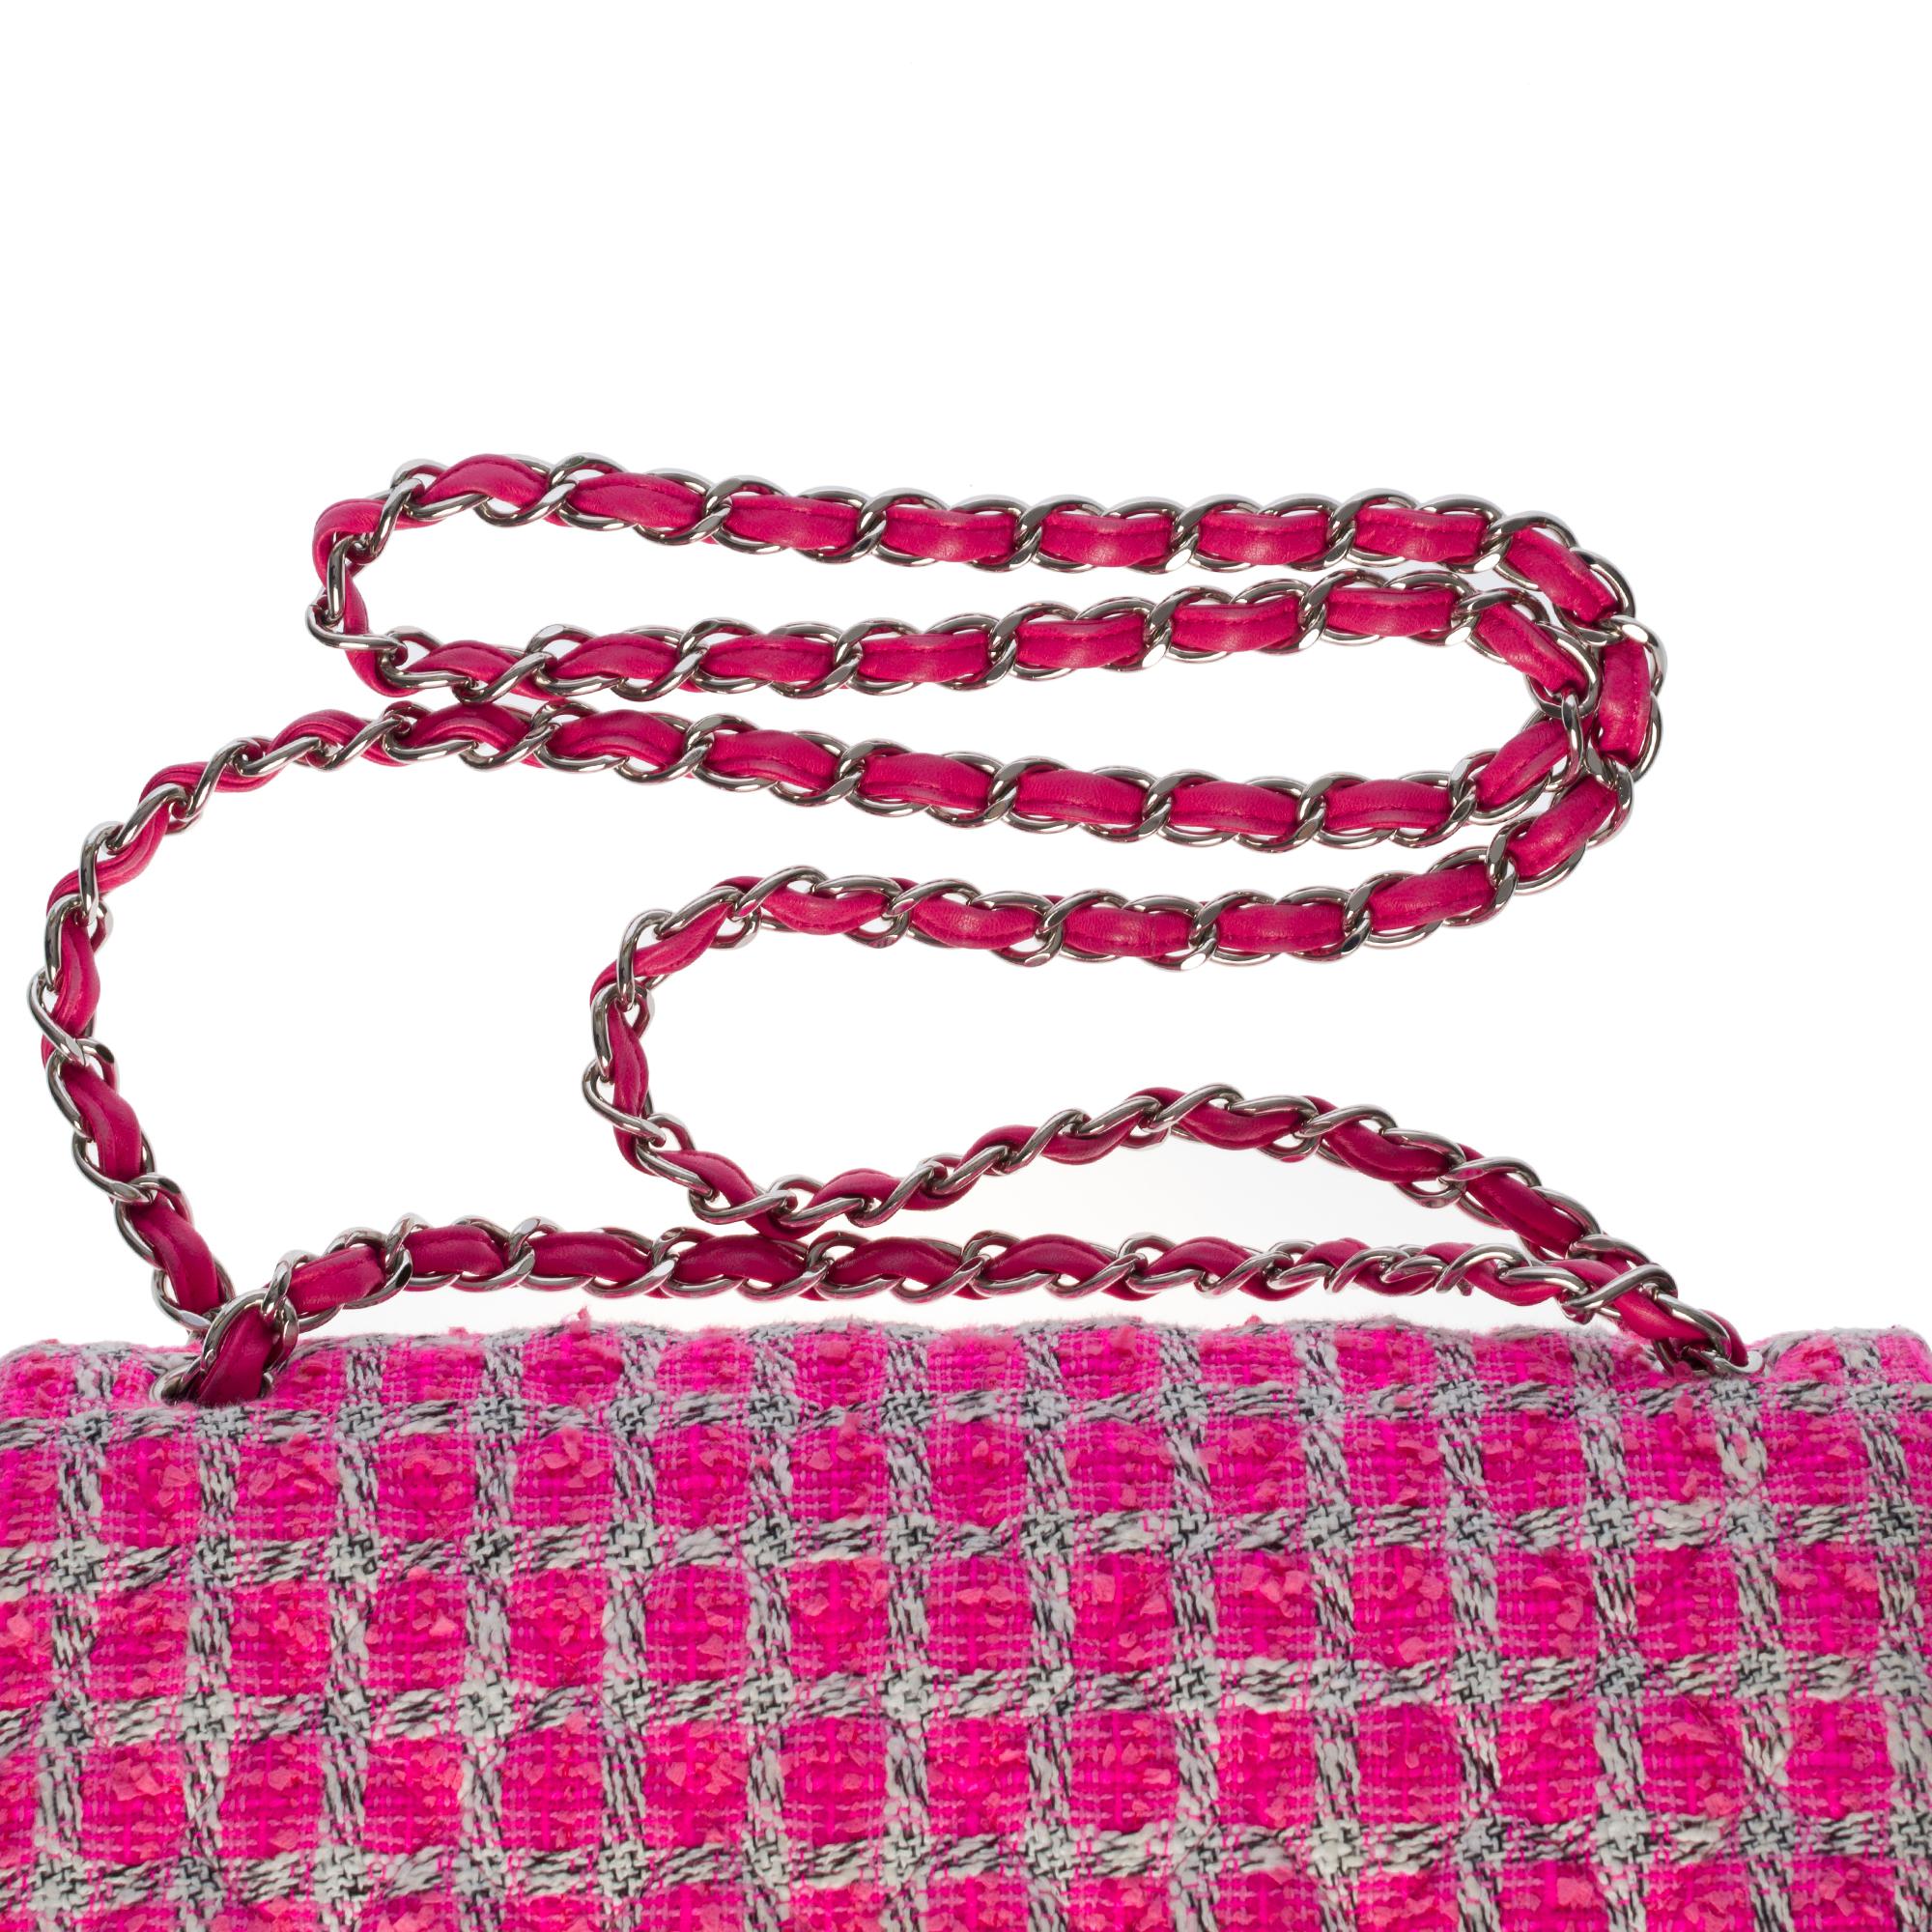 Limited Edition Chanel Timeless Jumbo Shoulder bag in Pink Tweed with SHW 3